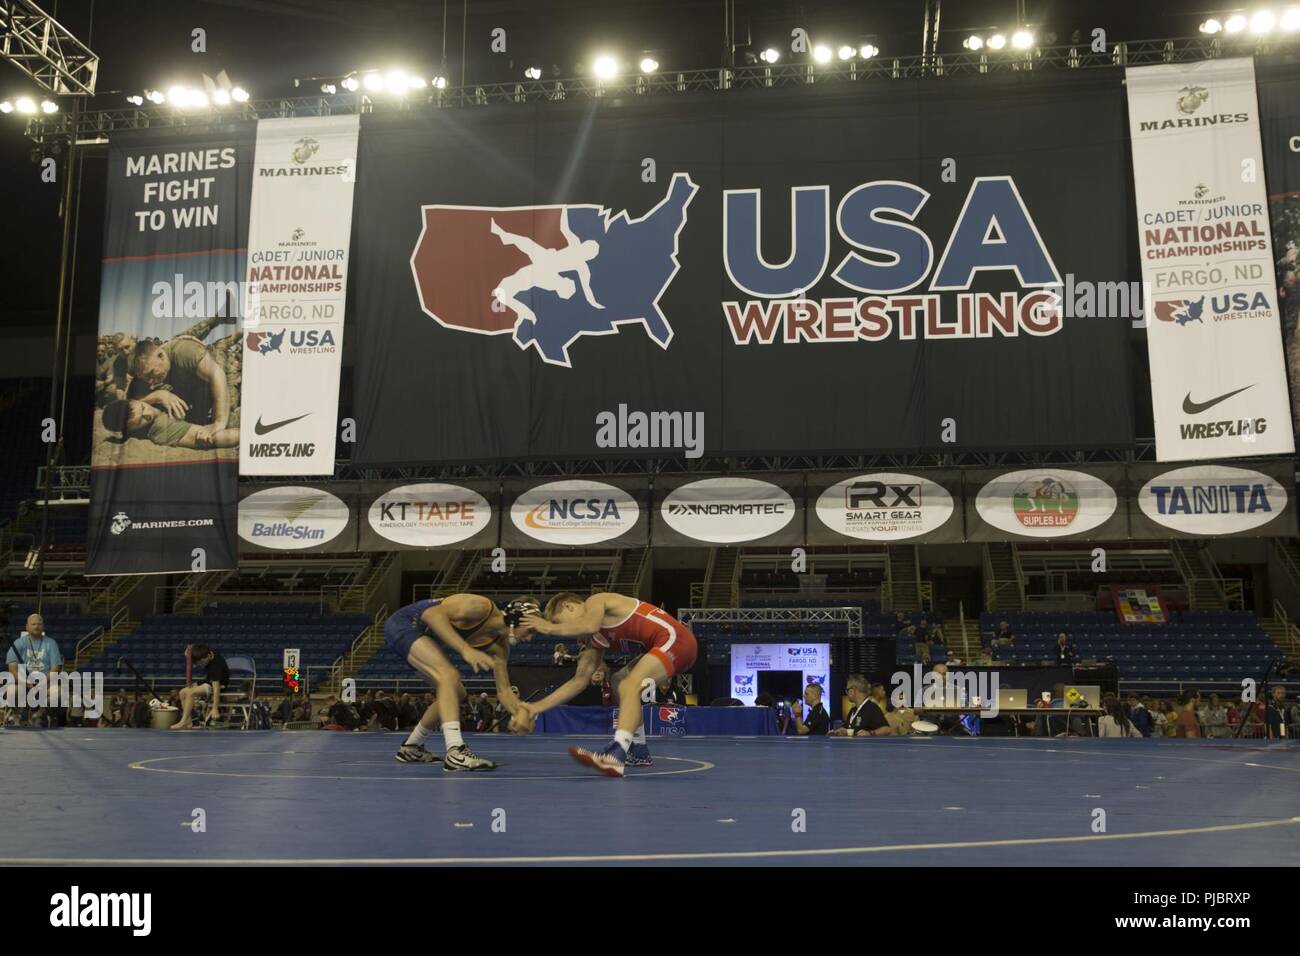 Keegan Slyter, a wrestler from Olathe North High School in Olathe, Kansas, and Khyler Brewer, a wrestler from Kansas City, Missouri, start their match against each other during the 2018 U.S. Marine Corps Freestyle Finals in Fargo, North Dakota, July 15. The Freestyle Finals feature more than 30 top-level athletes from across the country. By partnering with USA Wrestling, the national governing body for the sport in America, the Marine Corps will reach a broad cross-section of high school and collegiate-aged club wrestlers as well as an ever-growing influencer network of coaches, referees, wres Stock Photo